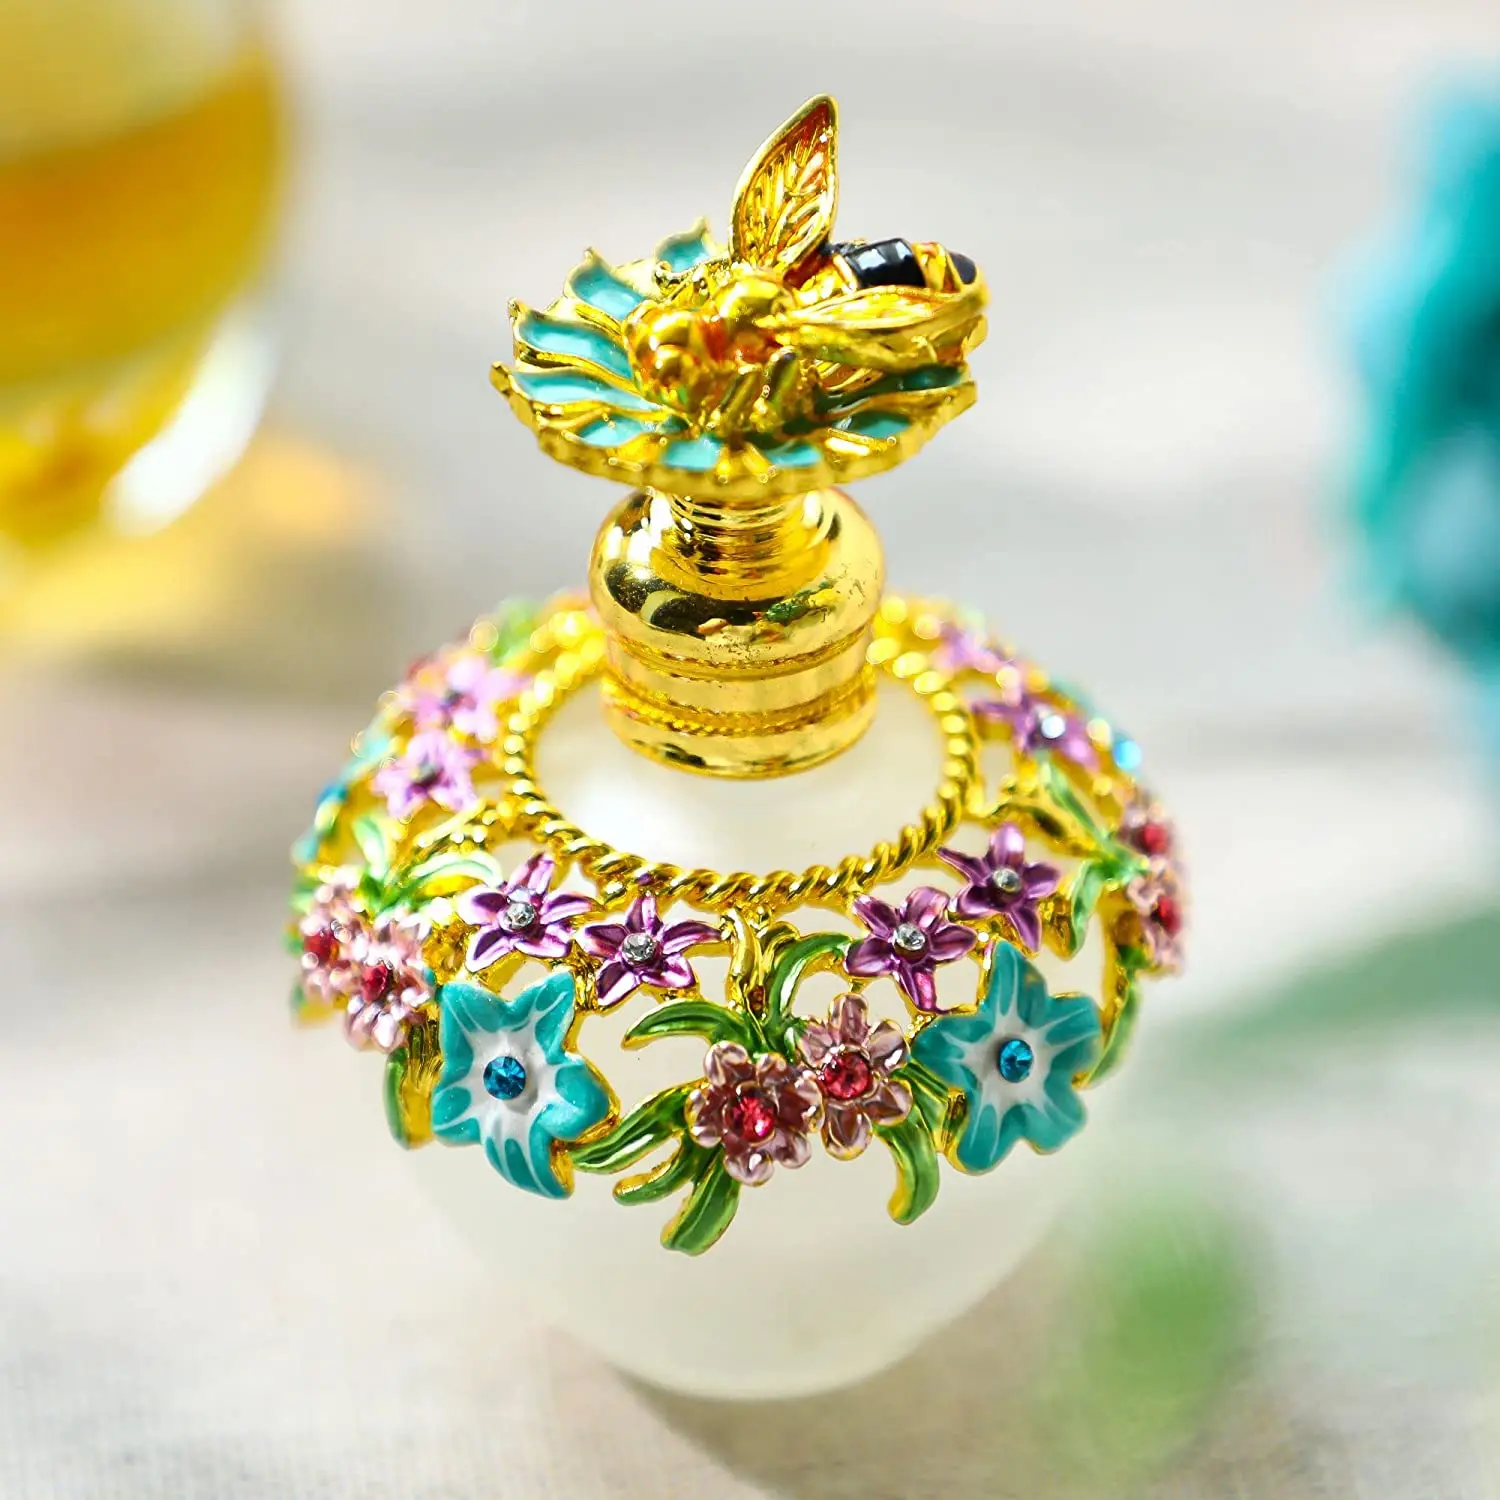 H&D Fancy Glass Perfume Bottle Empty with Flowers Bee Charm Decorative Vintage Crystal Perfume Decanter(Golden,40ML) o339 korean style charm bridal wedding hair accessories silver shiny crystal pearl bridal hairbands with small flowers